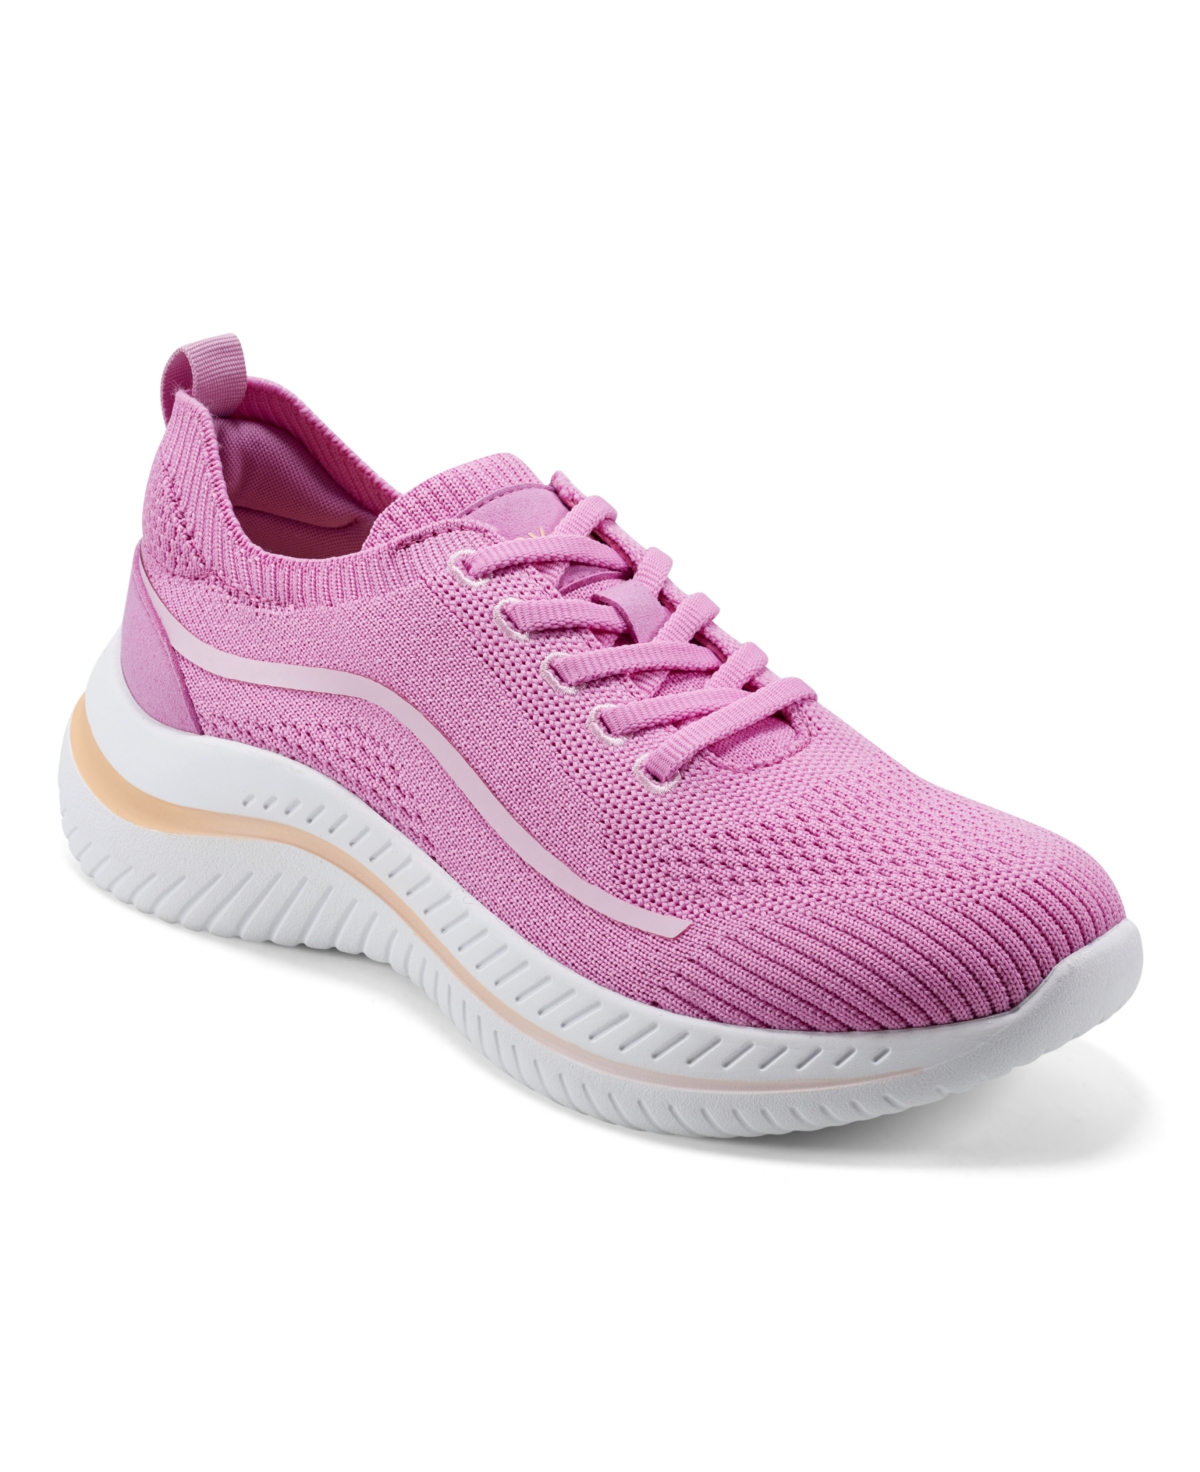 Women's Gage Lace-Up Casual Round Toe Sneakers - Pink